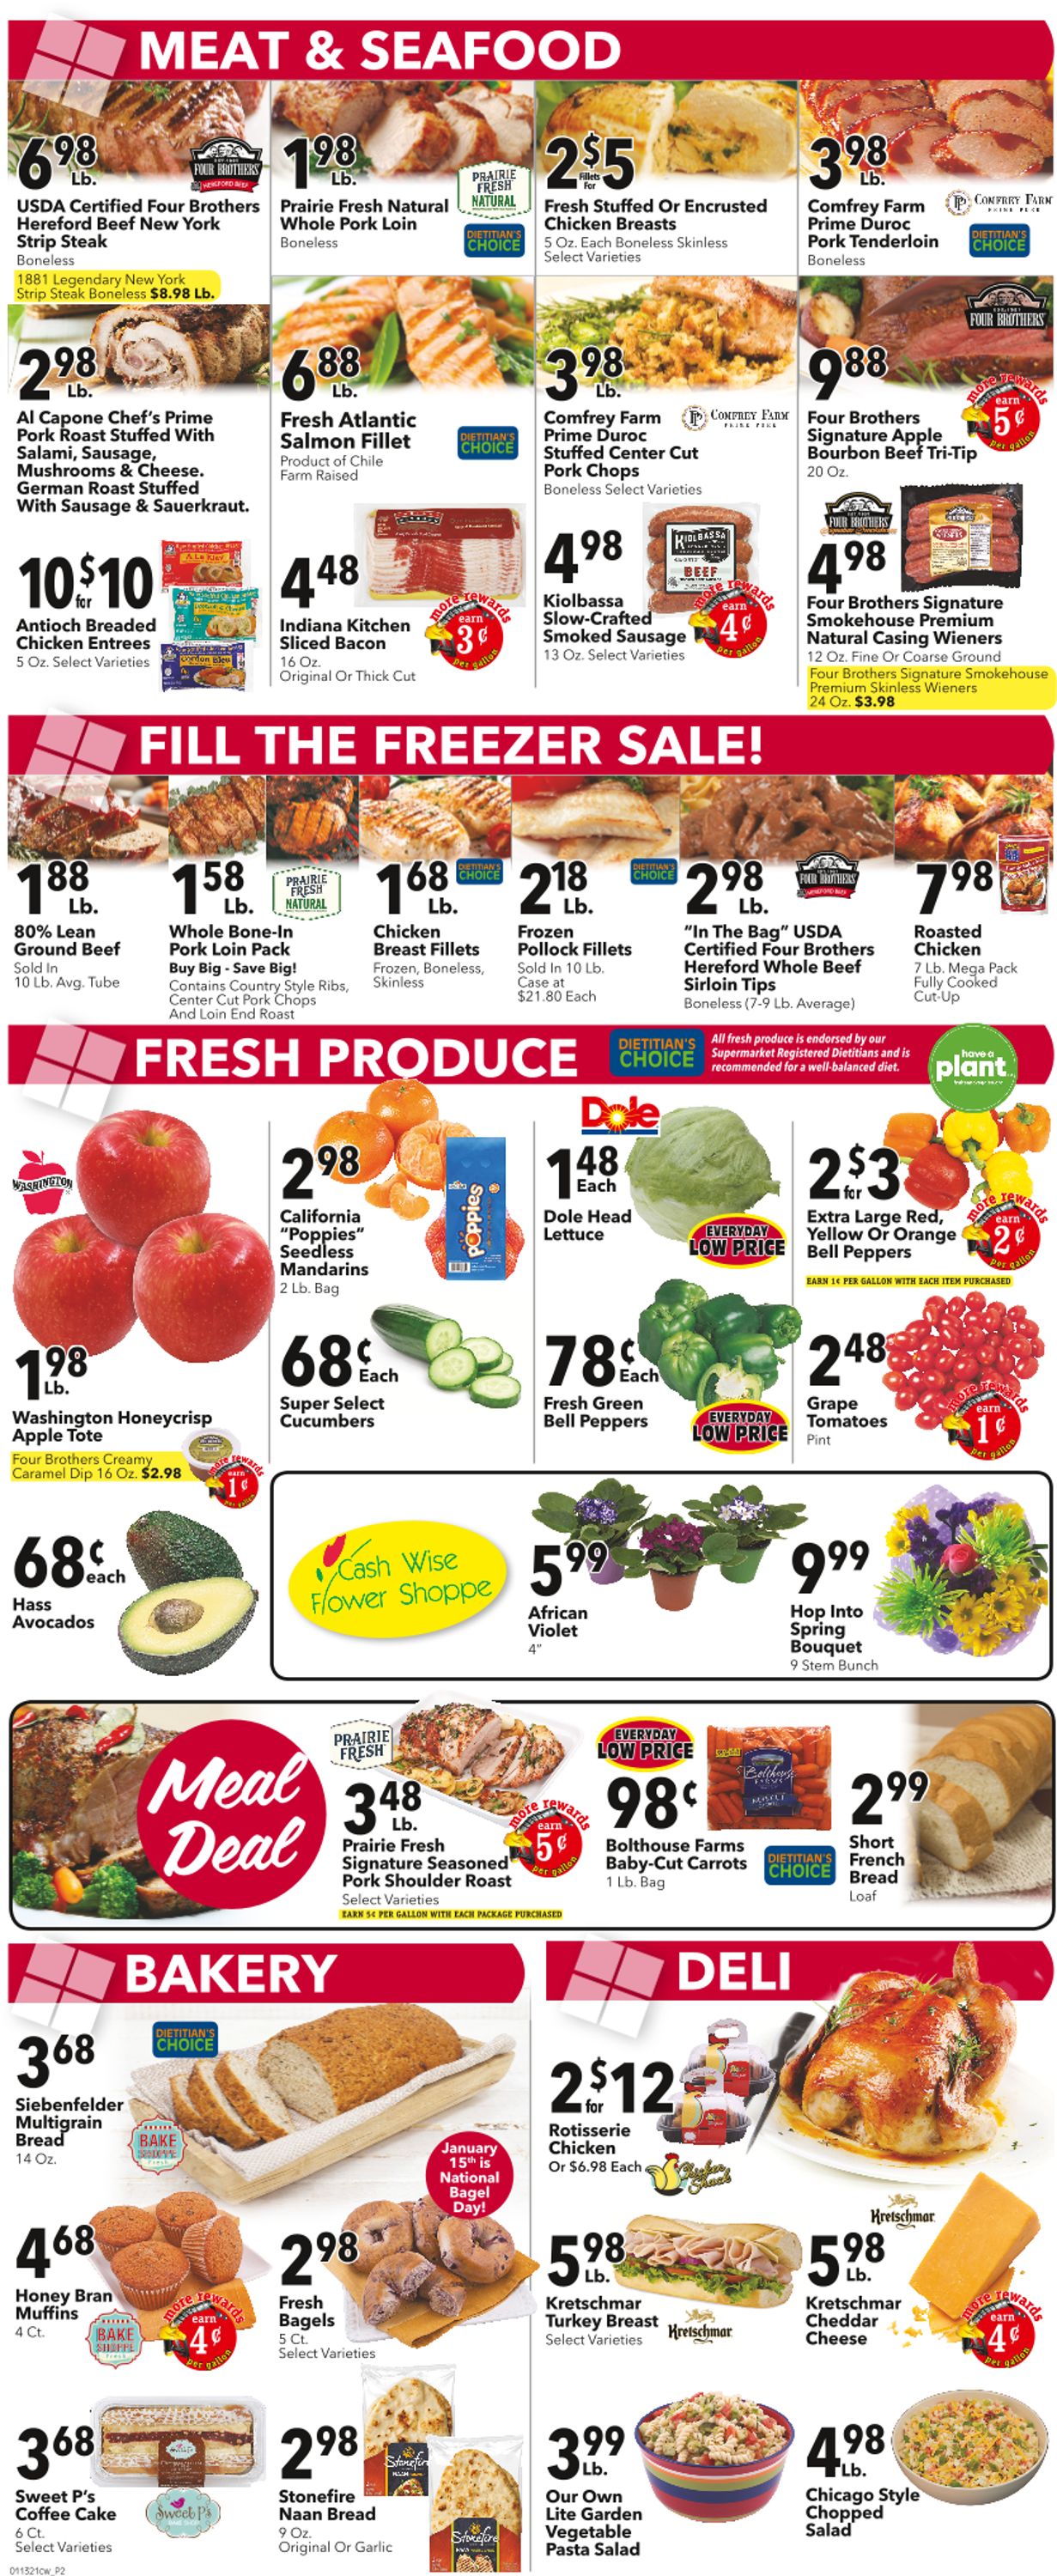 Cash Wise Weekly Ad Circular - valid 01/13-01/19/2021 (Page 2)